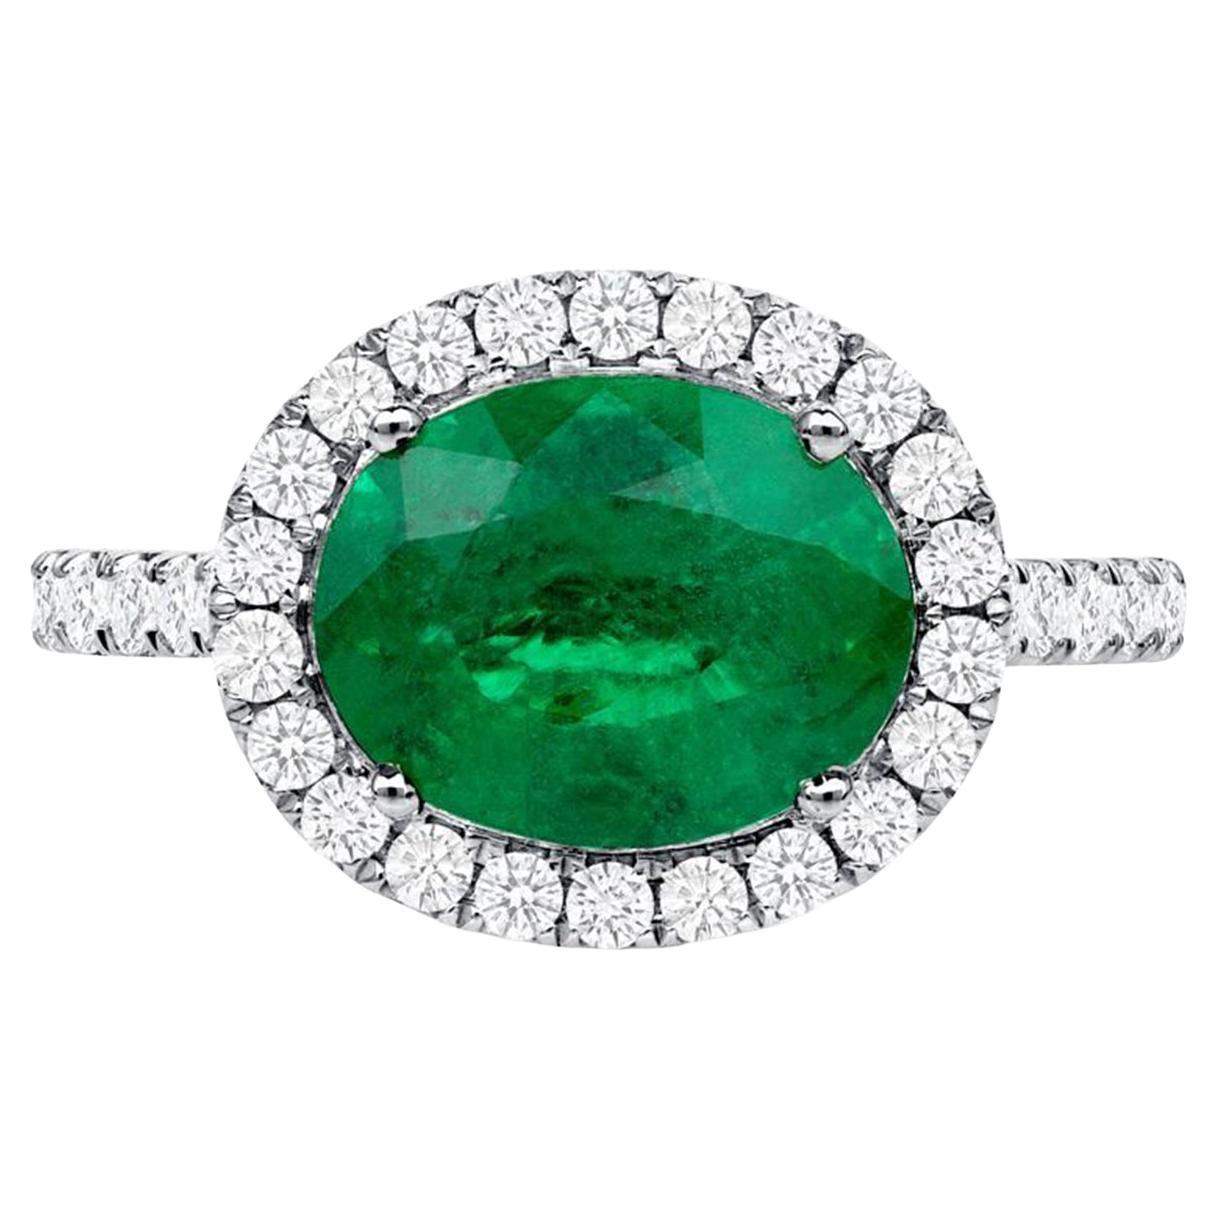 1.87 Ct Zambian Emerald & 0.65 Ct Diamonds in 14K White Gold Engagement Ring For Sale